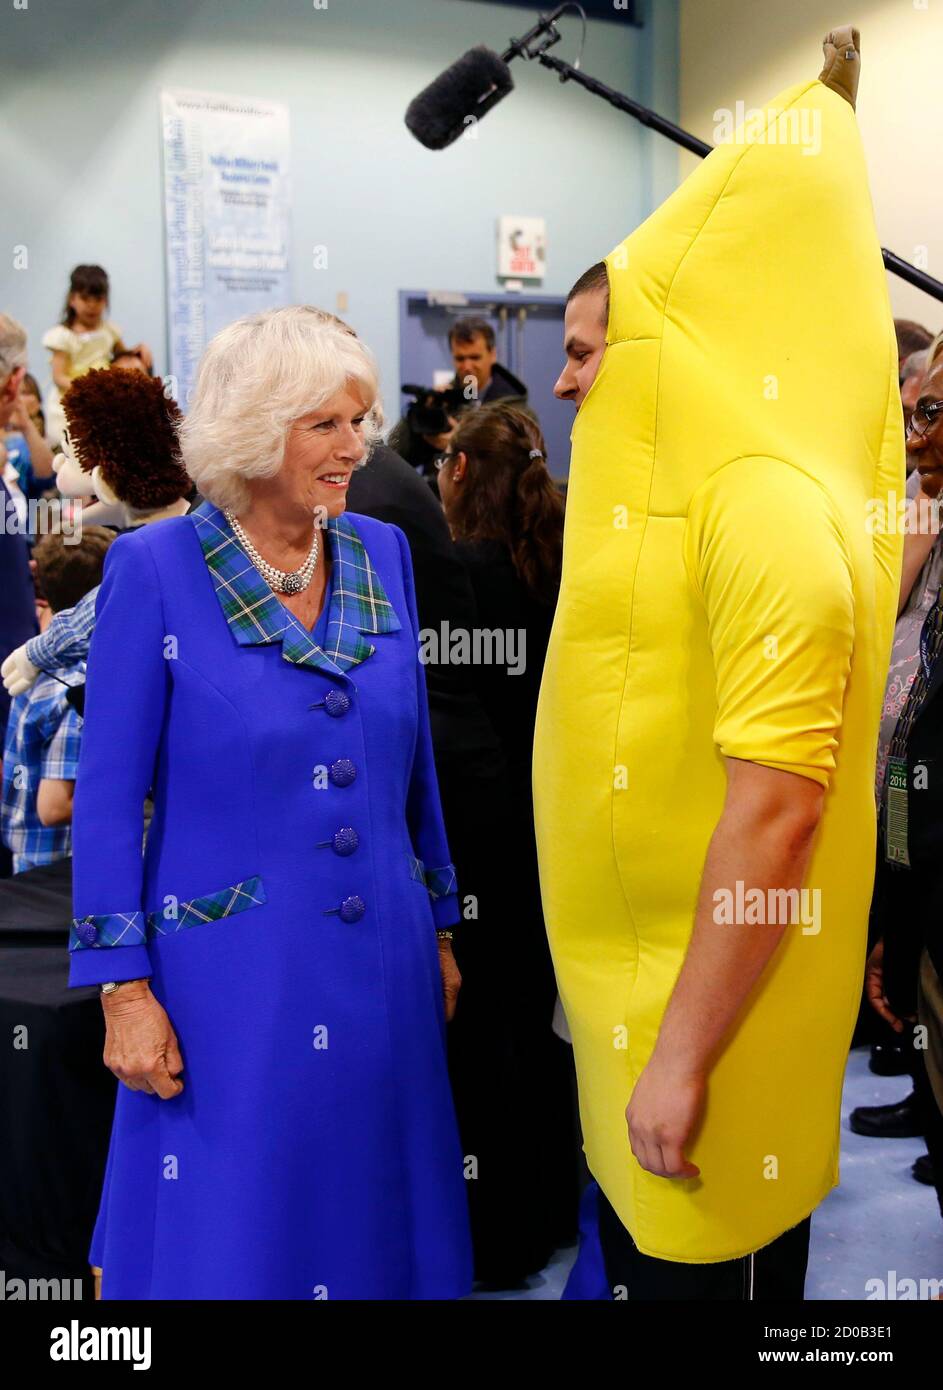 Britain's Camilla, Duchess of Cornwall (L), greets a man dressed as a  banana during a visit to the Military Family Resource Centre in Halifax,  Nova Scotia, May 19, 2014. Puppets and costumes